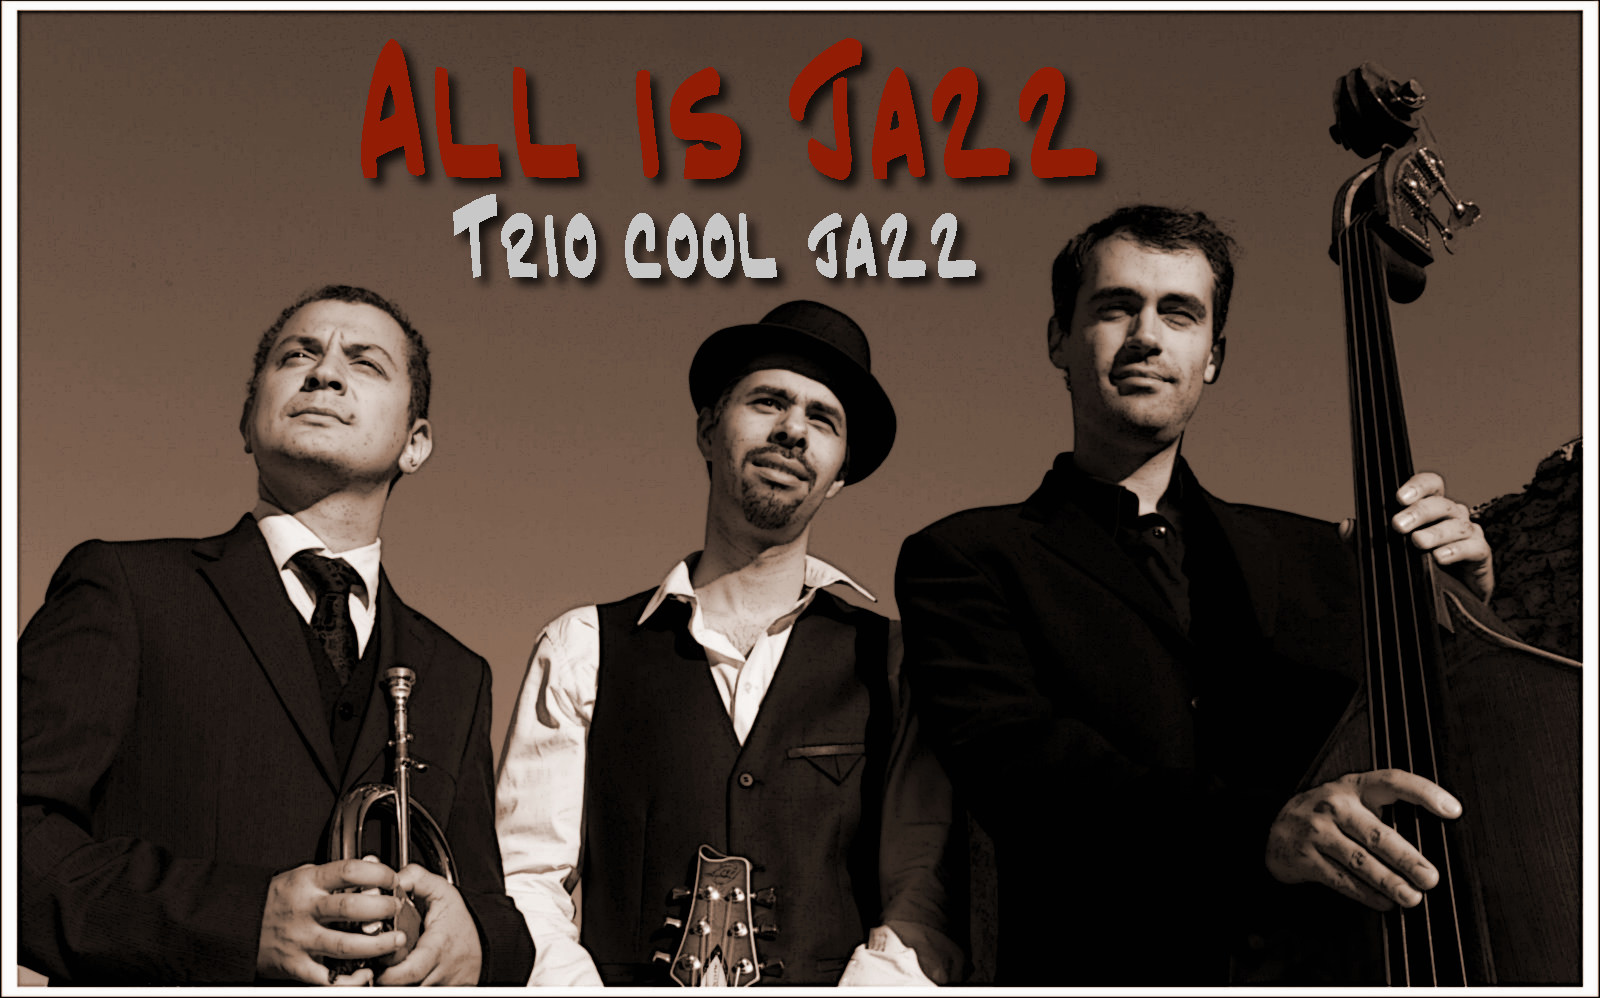 All is Jazz, le trio cool jazz idal pour vos cocktails.